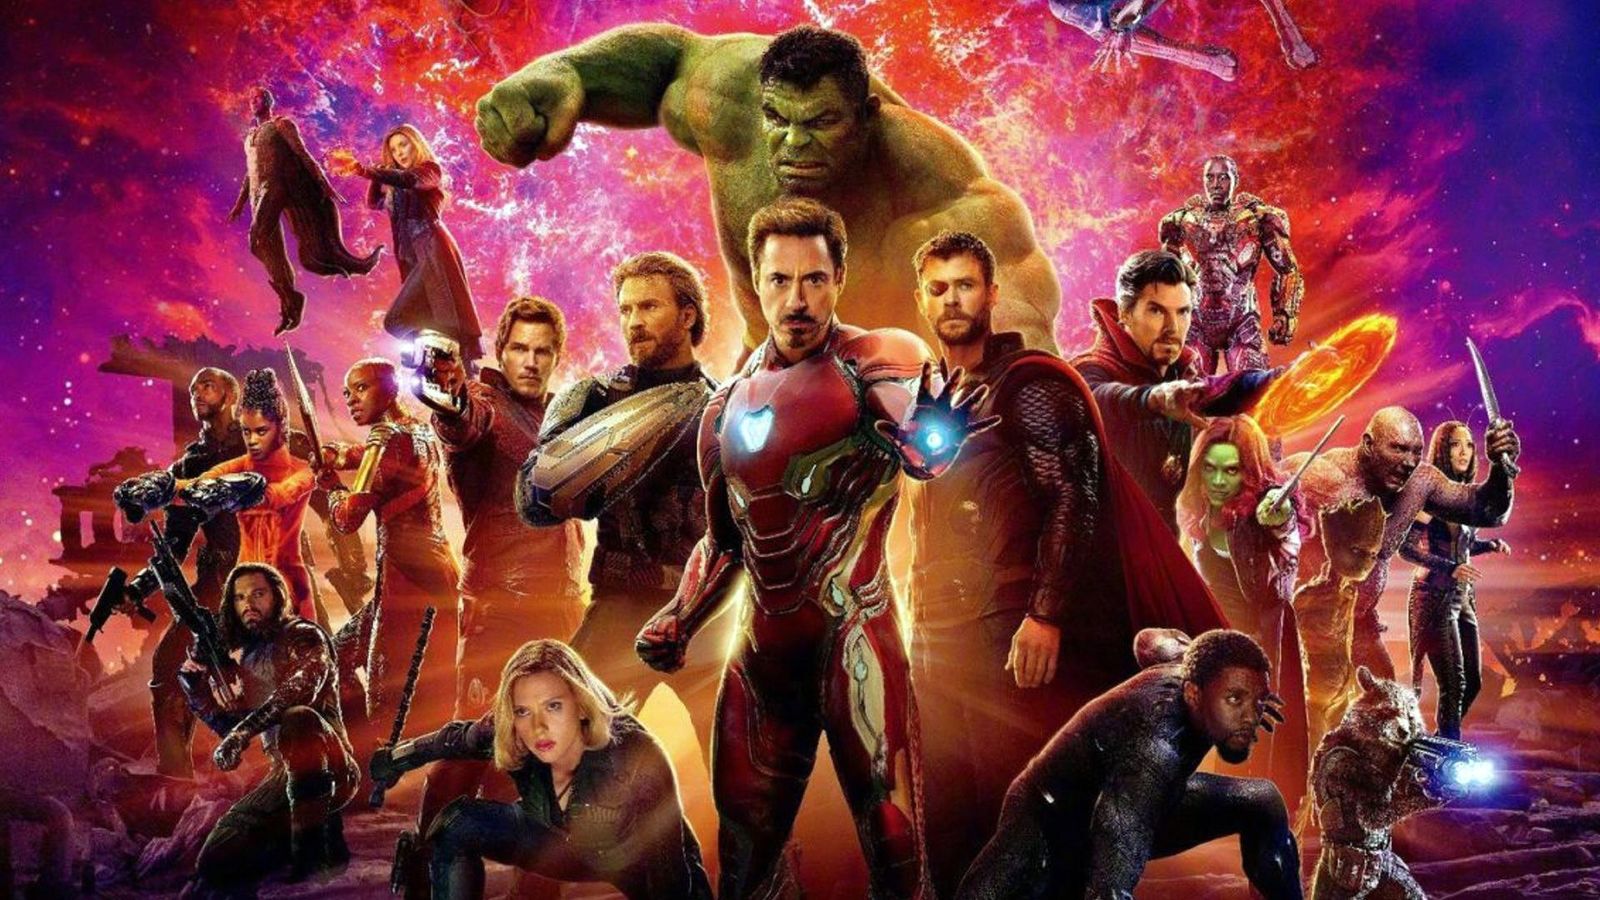 Avengers Endgame Opening Day Predictions In India Suggest The Film Will Smash All Box Office Records Ever Known